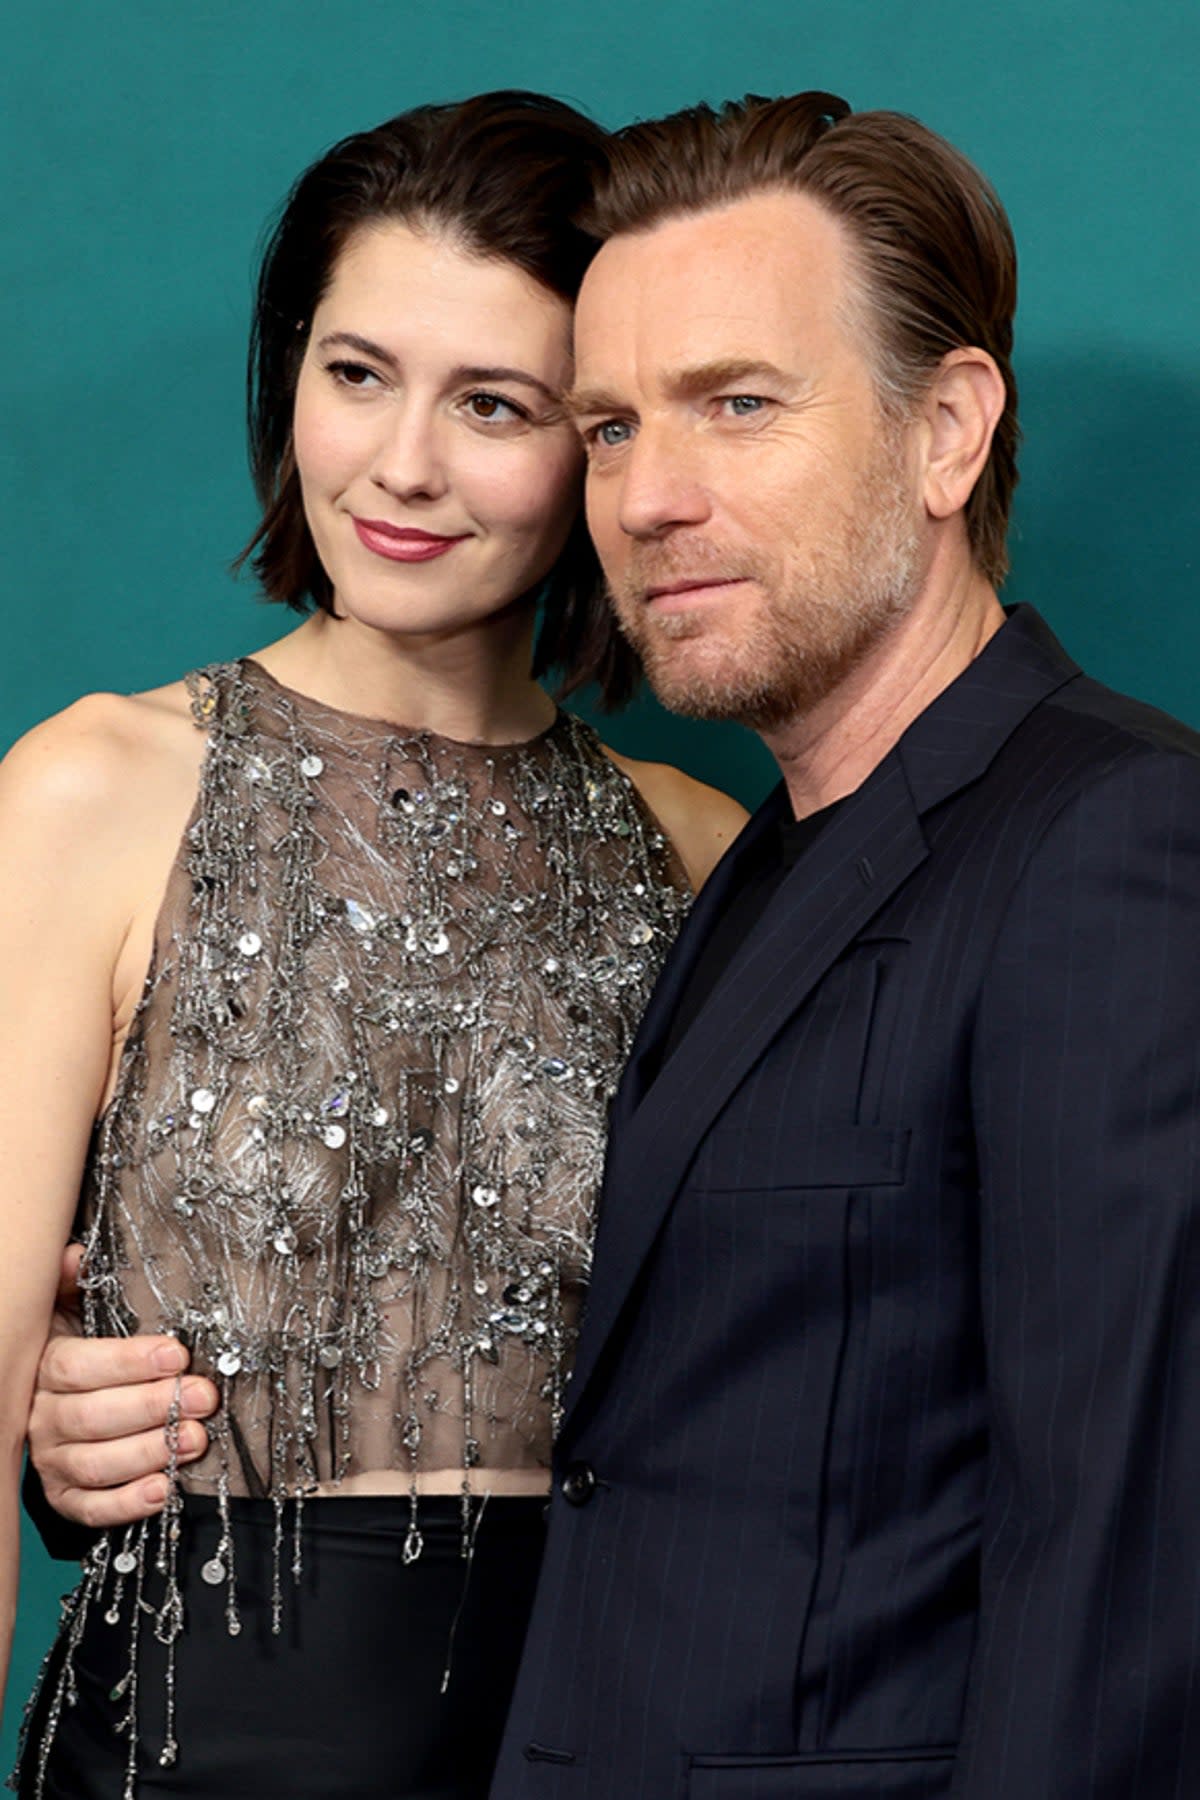 A-list couple: Winstead and McGregor at the New York premiere of ‘A Gentleman in Moscow’ in March (Getty Images)